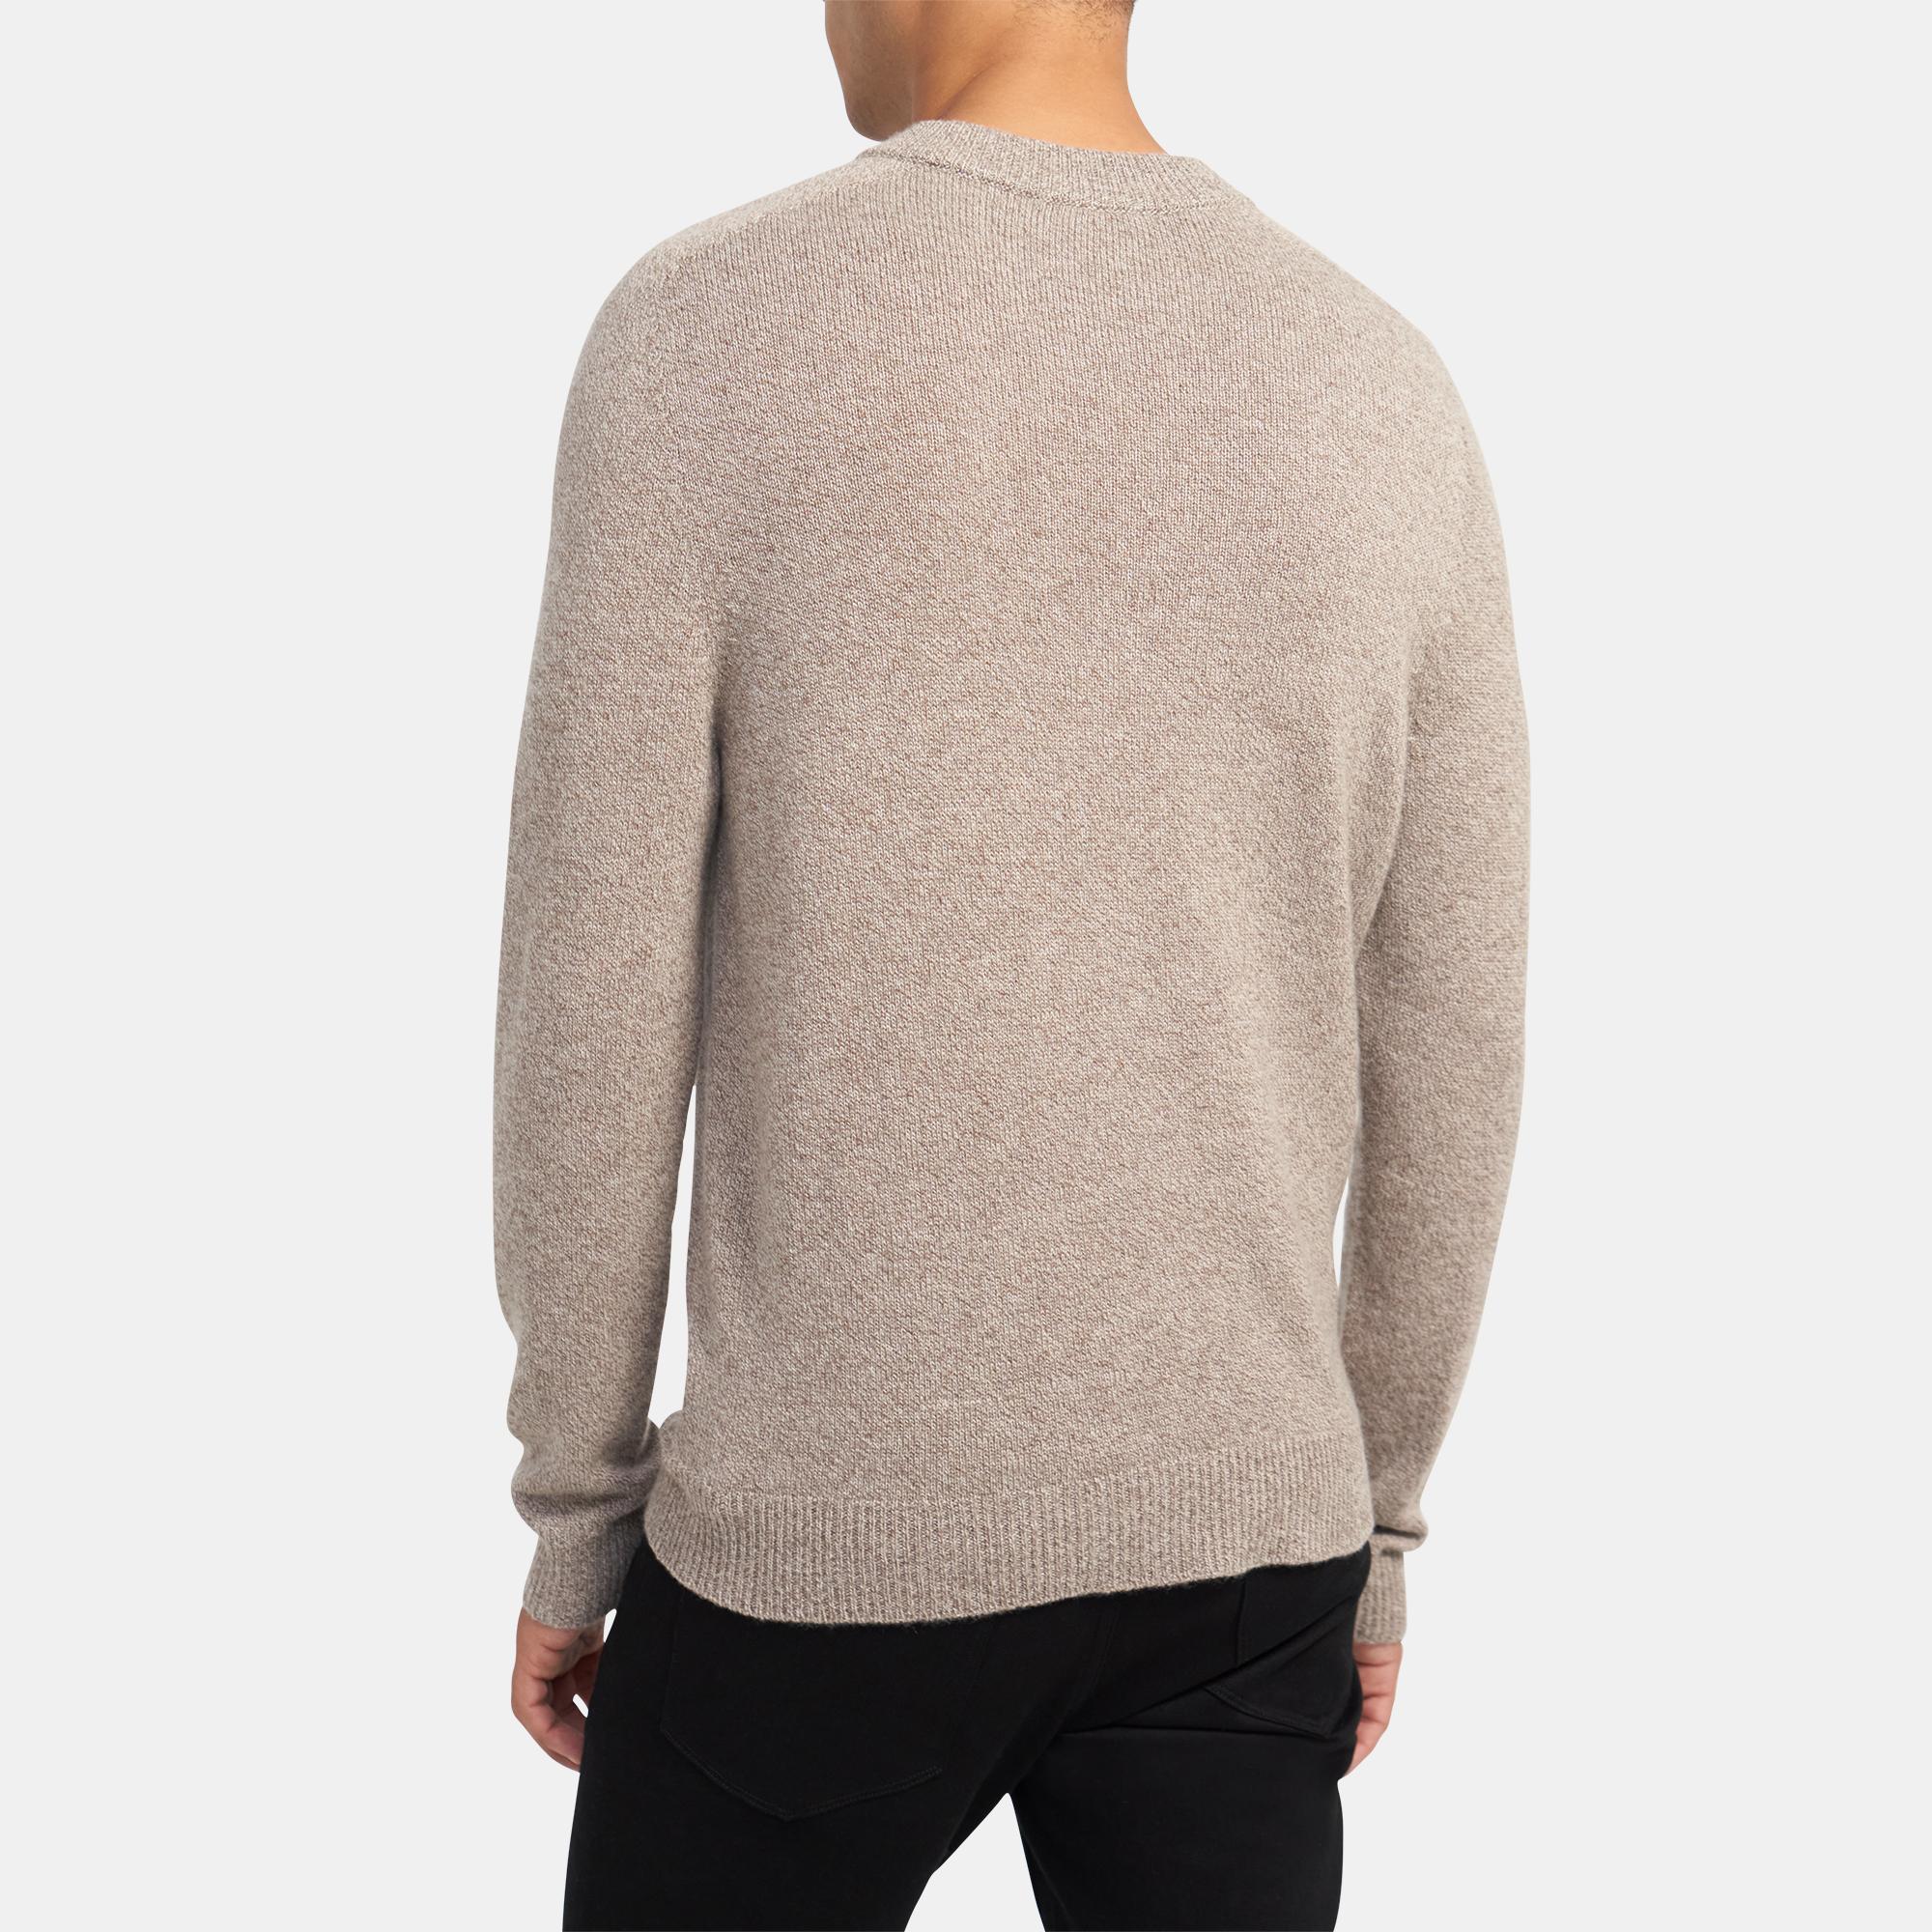 SEAMLESS MK NK | Theory Outlet